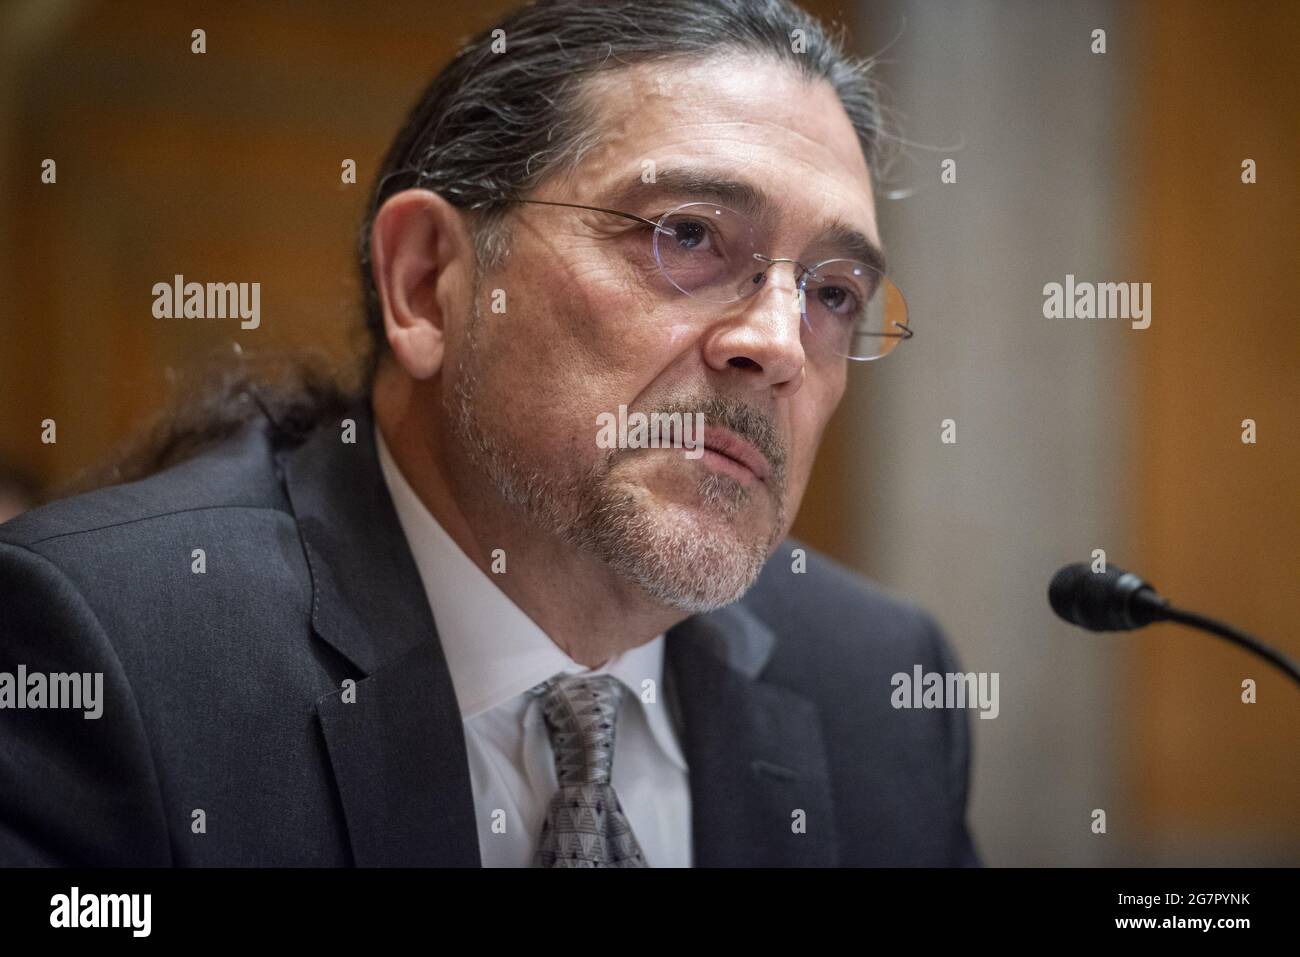 Washington, United States. 15th July, 2021. Robert Luis Santos appears before a Senate Committee on Homeland Security and Governmental Affairs hearing for his nomination to be Director of the Census, Department of Commerce, in the Dirksen Senate Office Building in Washington, DC, USA, Thursday, July 15, 2021. Photo by Rod Lamkey/CNP/ABACAPRESS.COM Credit: Abaca Press/Alamy Live News Stock Photo